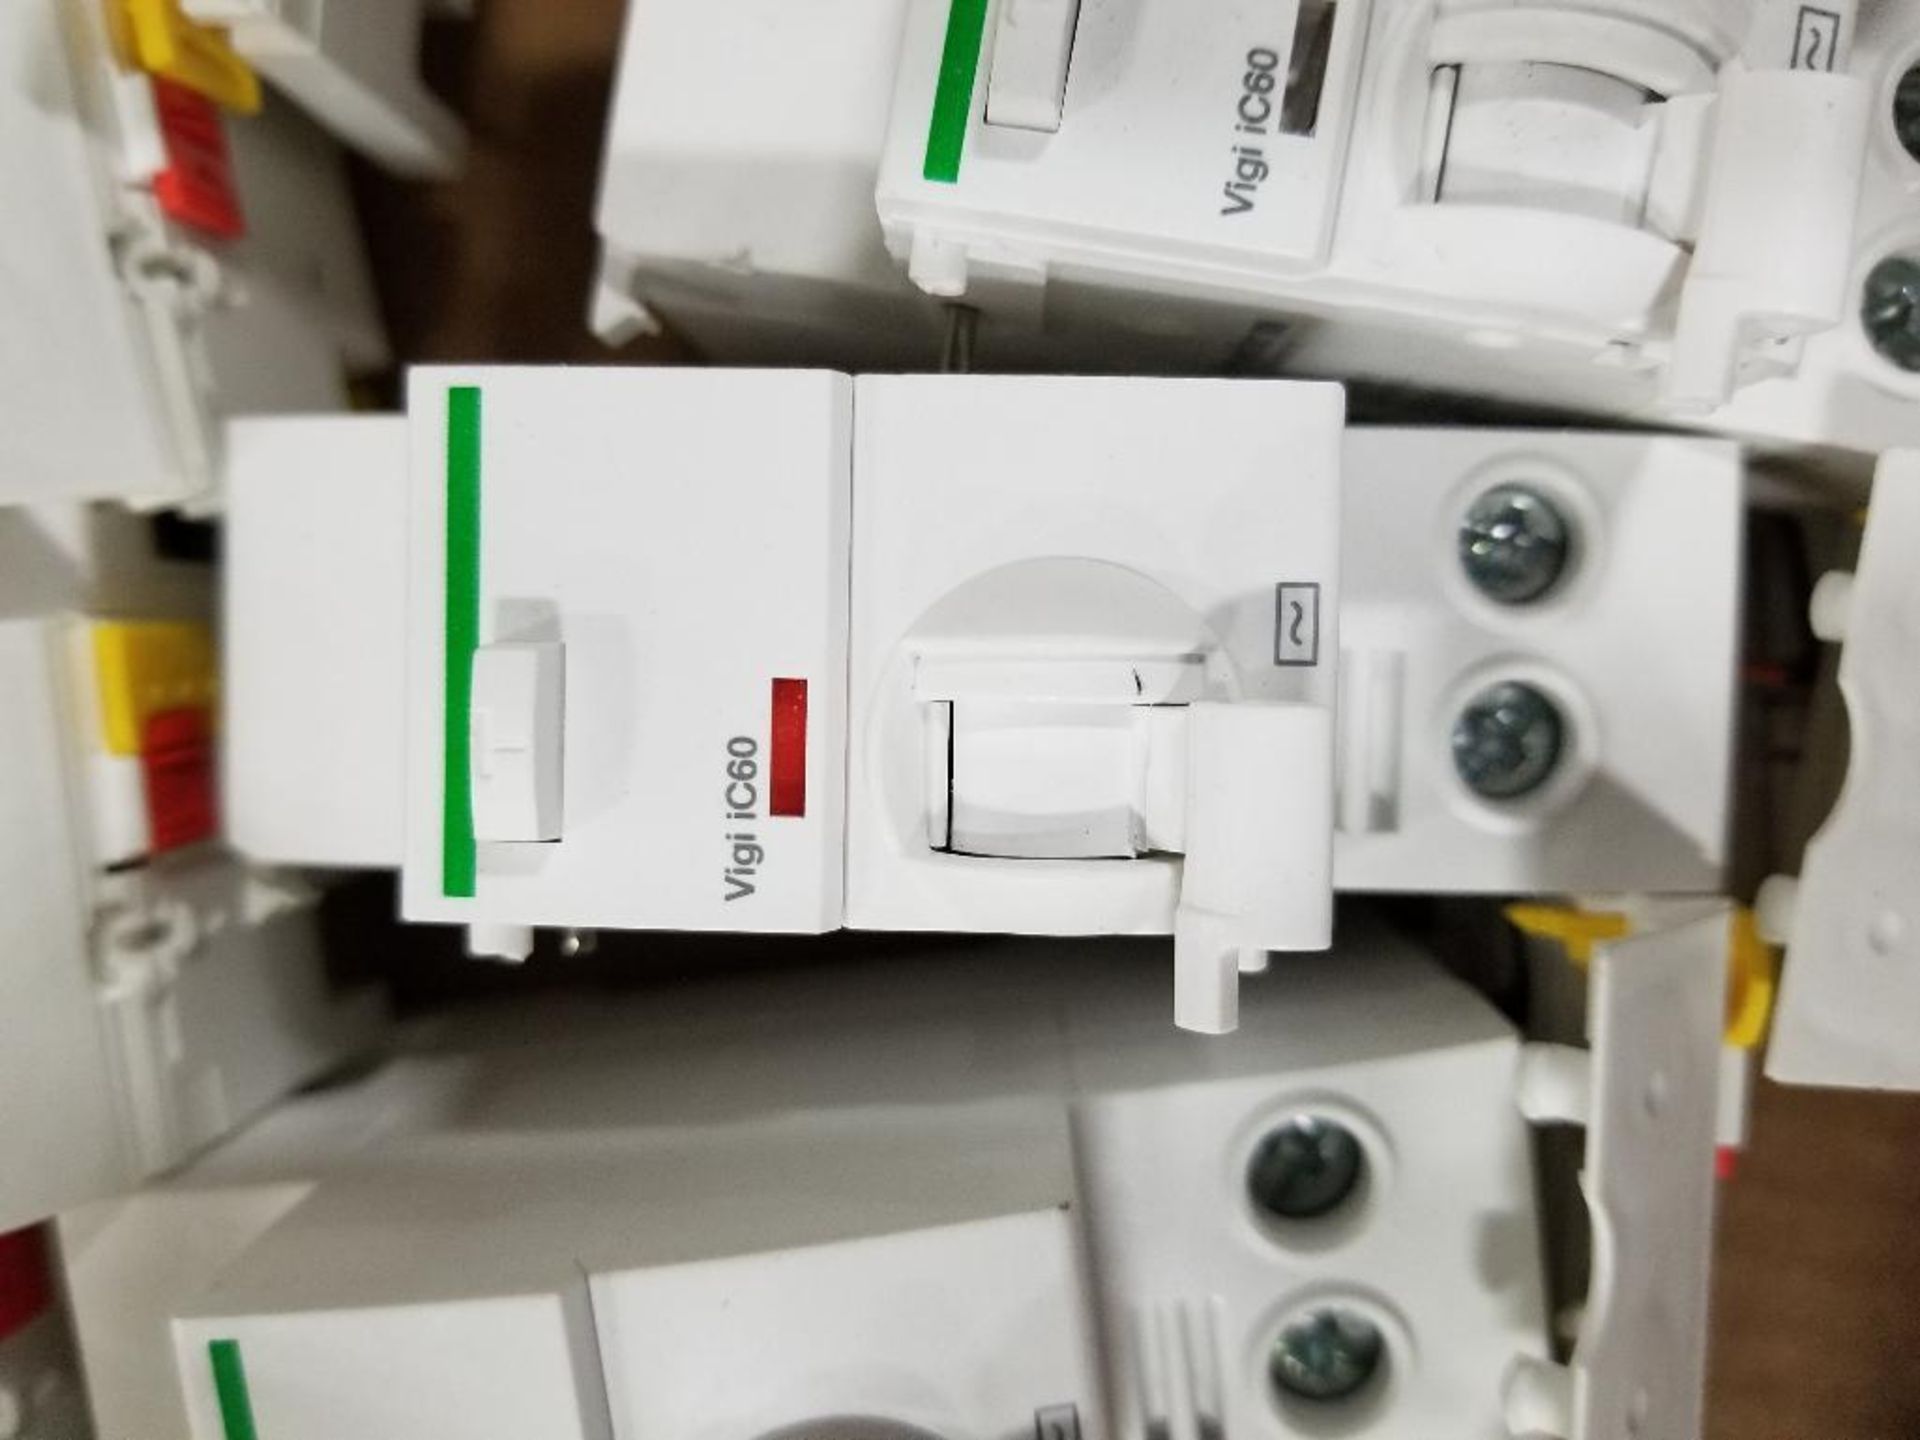 Qty 17 - Schneider Electric residual current device. Model A941225. New without box. - Image 3 of 4